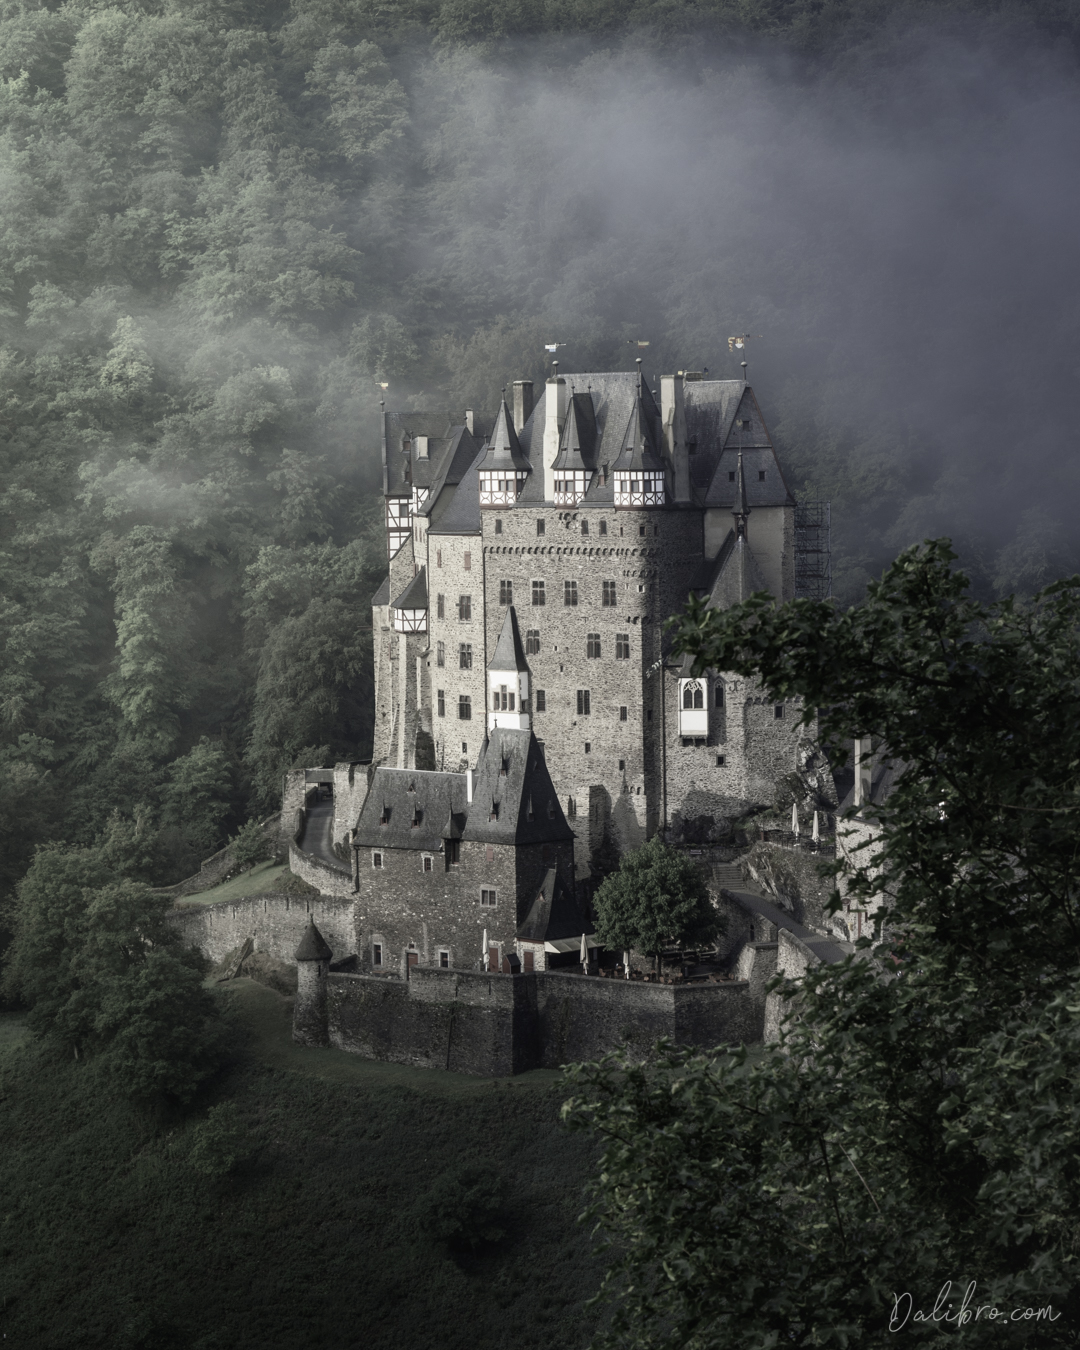 Burg Eltz - view from the road curve